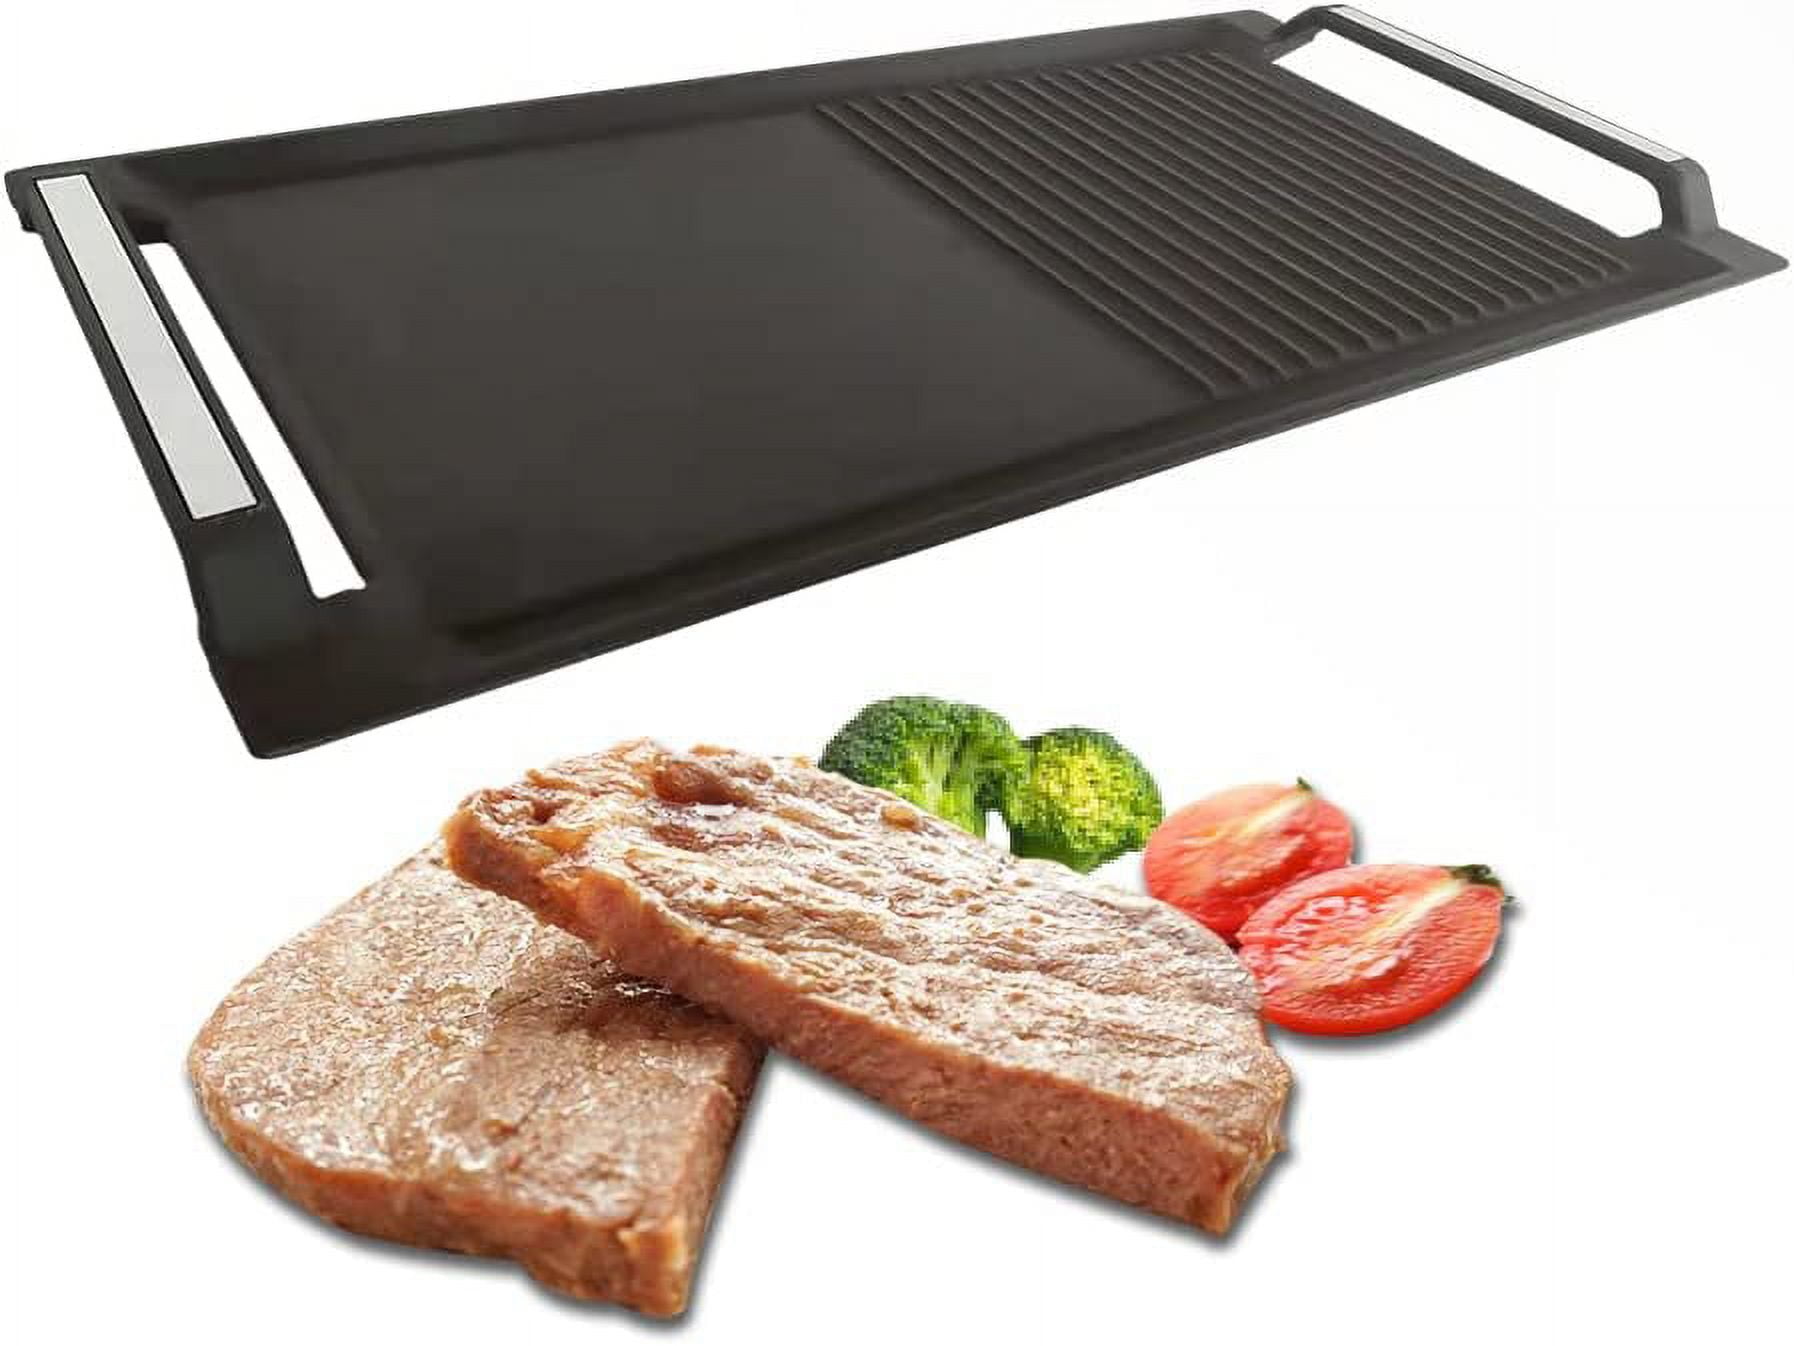 Griddle Pan, Cast Iron Grill Hot Plate, Rectangular Grill, 2 handles with  Flat and Ridged Surface for Induction Electric Cooktop，16.7 x 9.1inch 